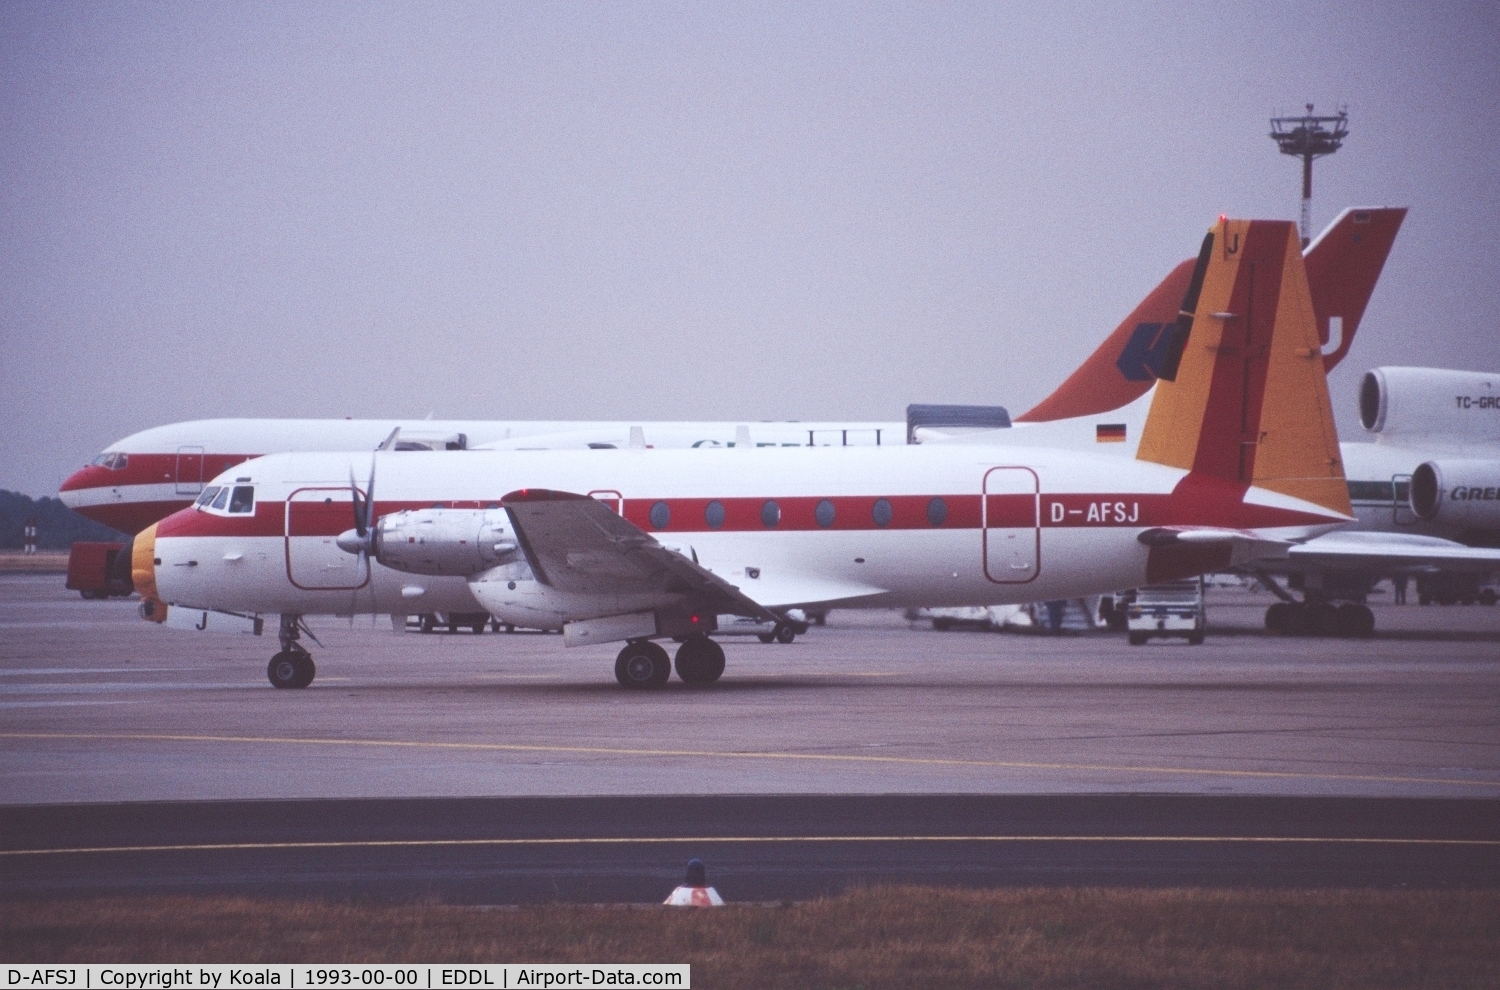 D-AFSJ, 1974 Hawker Siddeley HS.748 Series 2A C/N 1727, Old Lady in new c/s